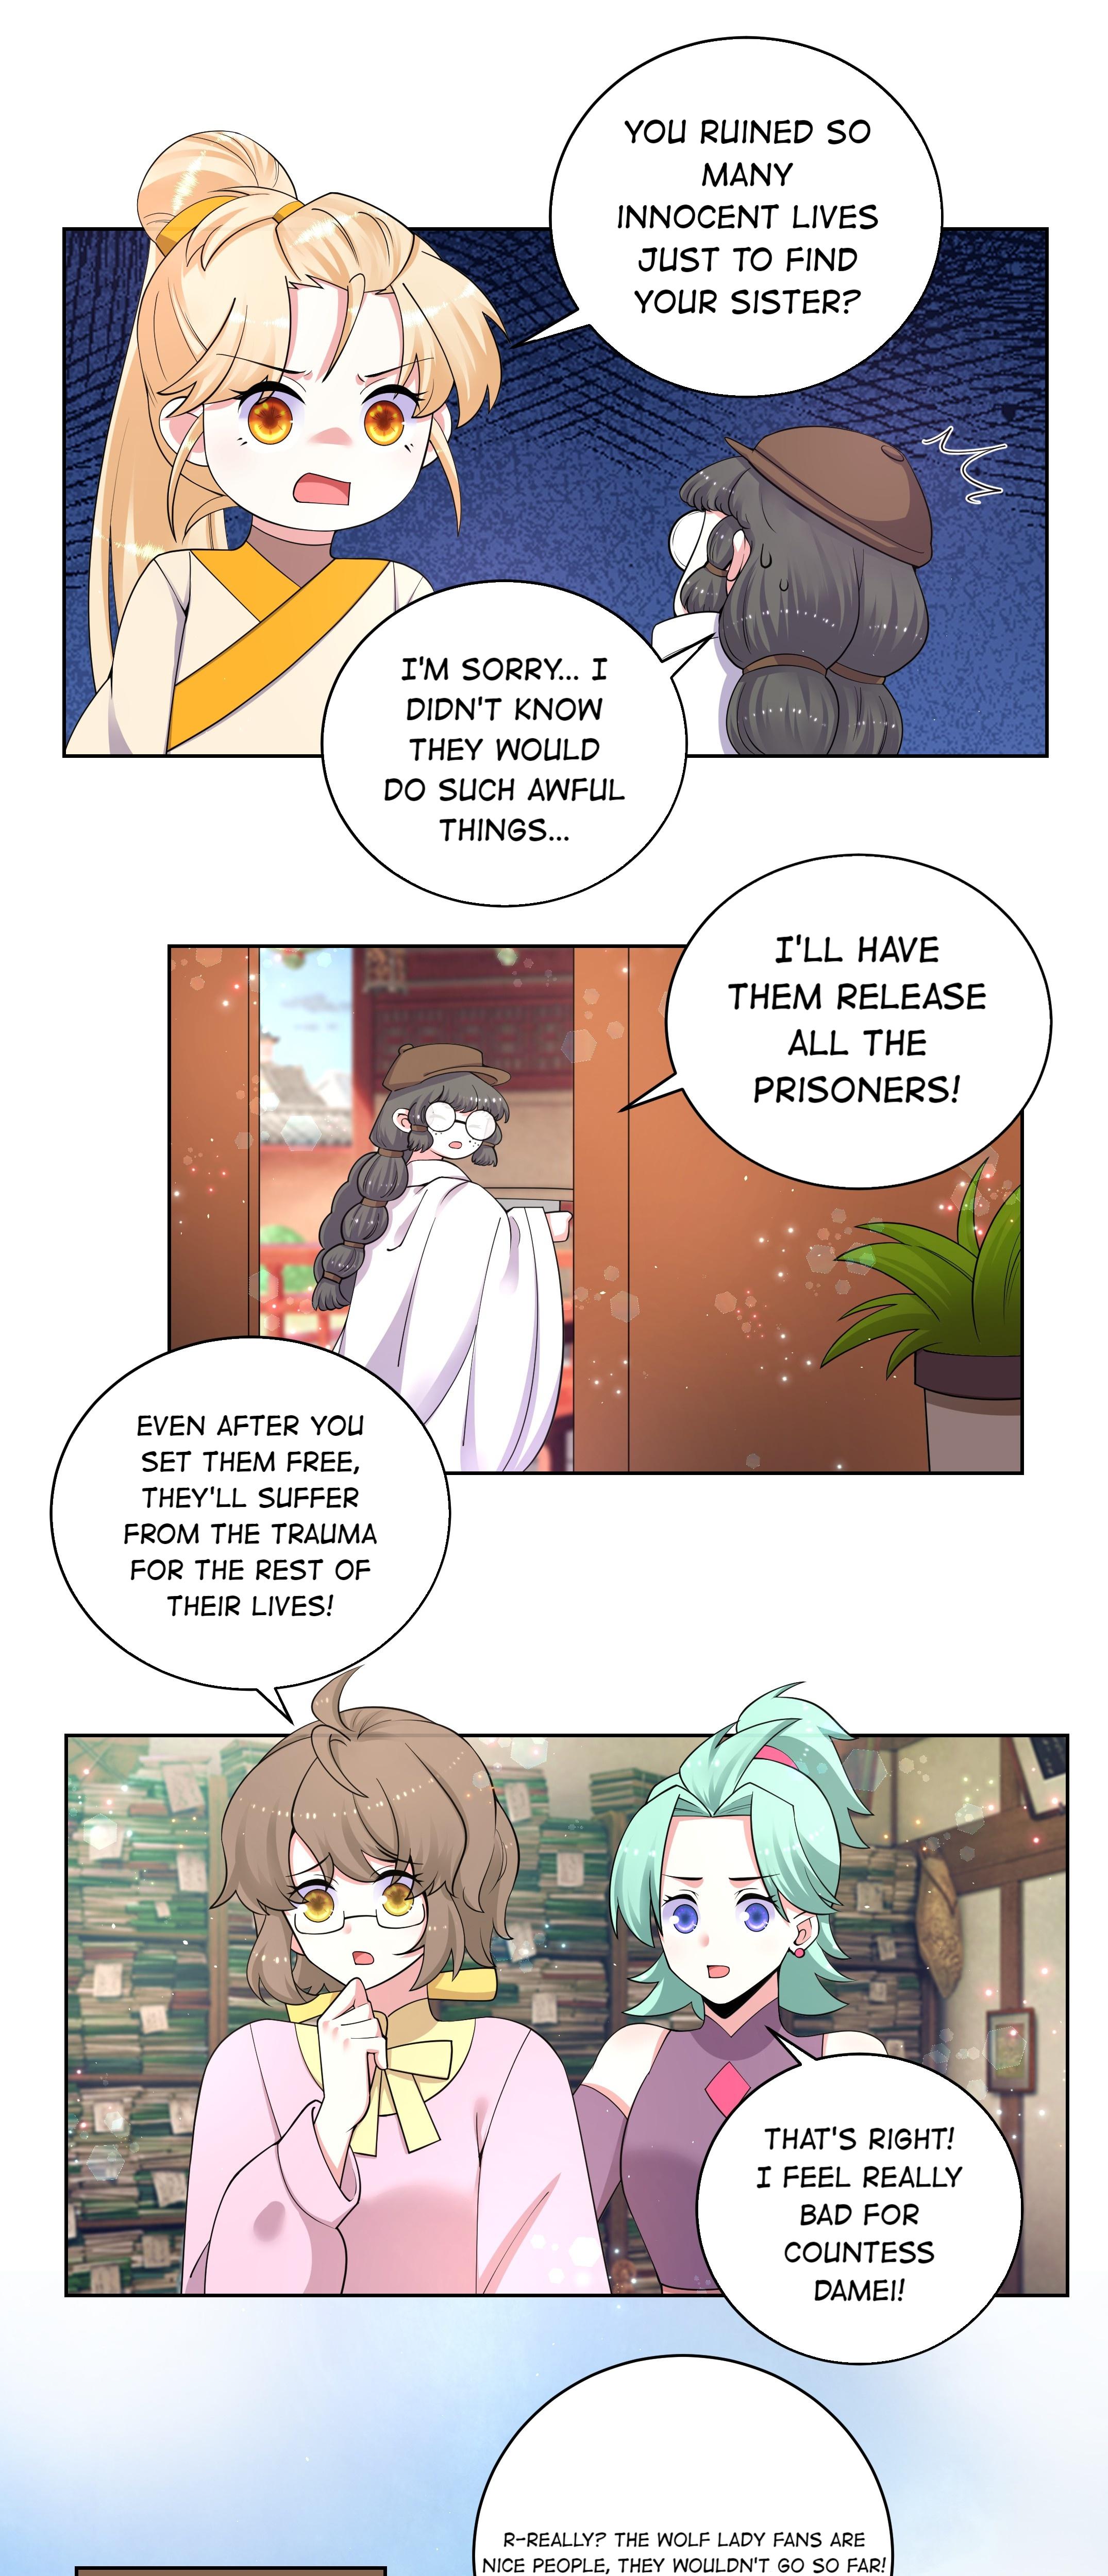 The Incapable Married Princess - Page 2